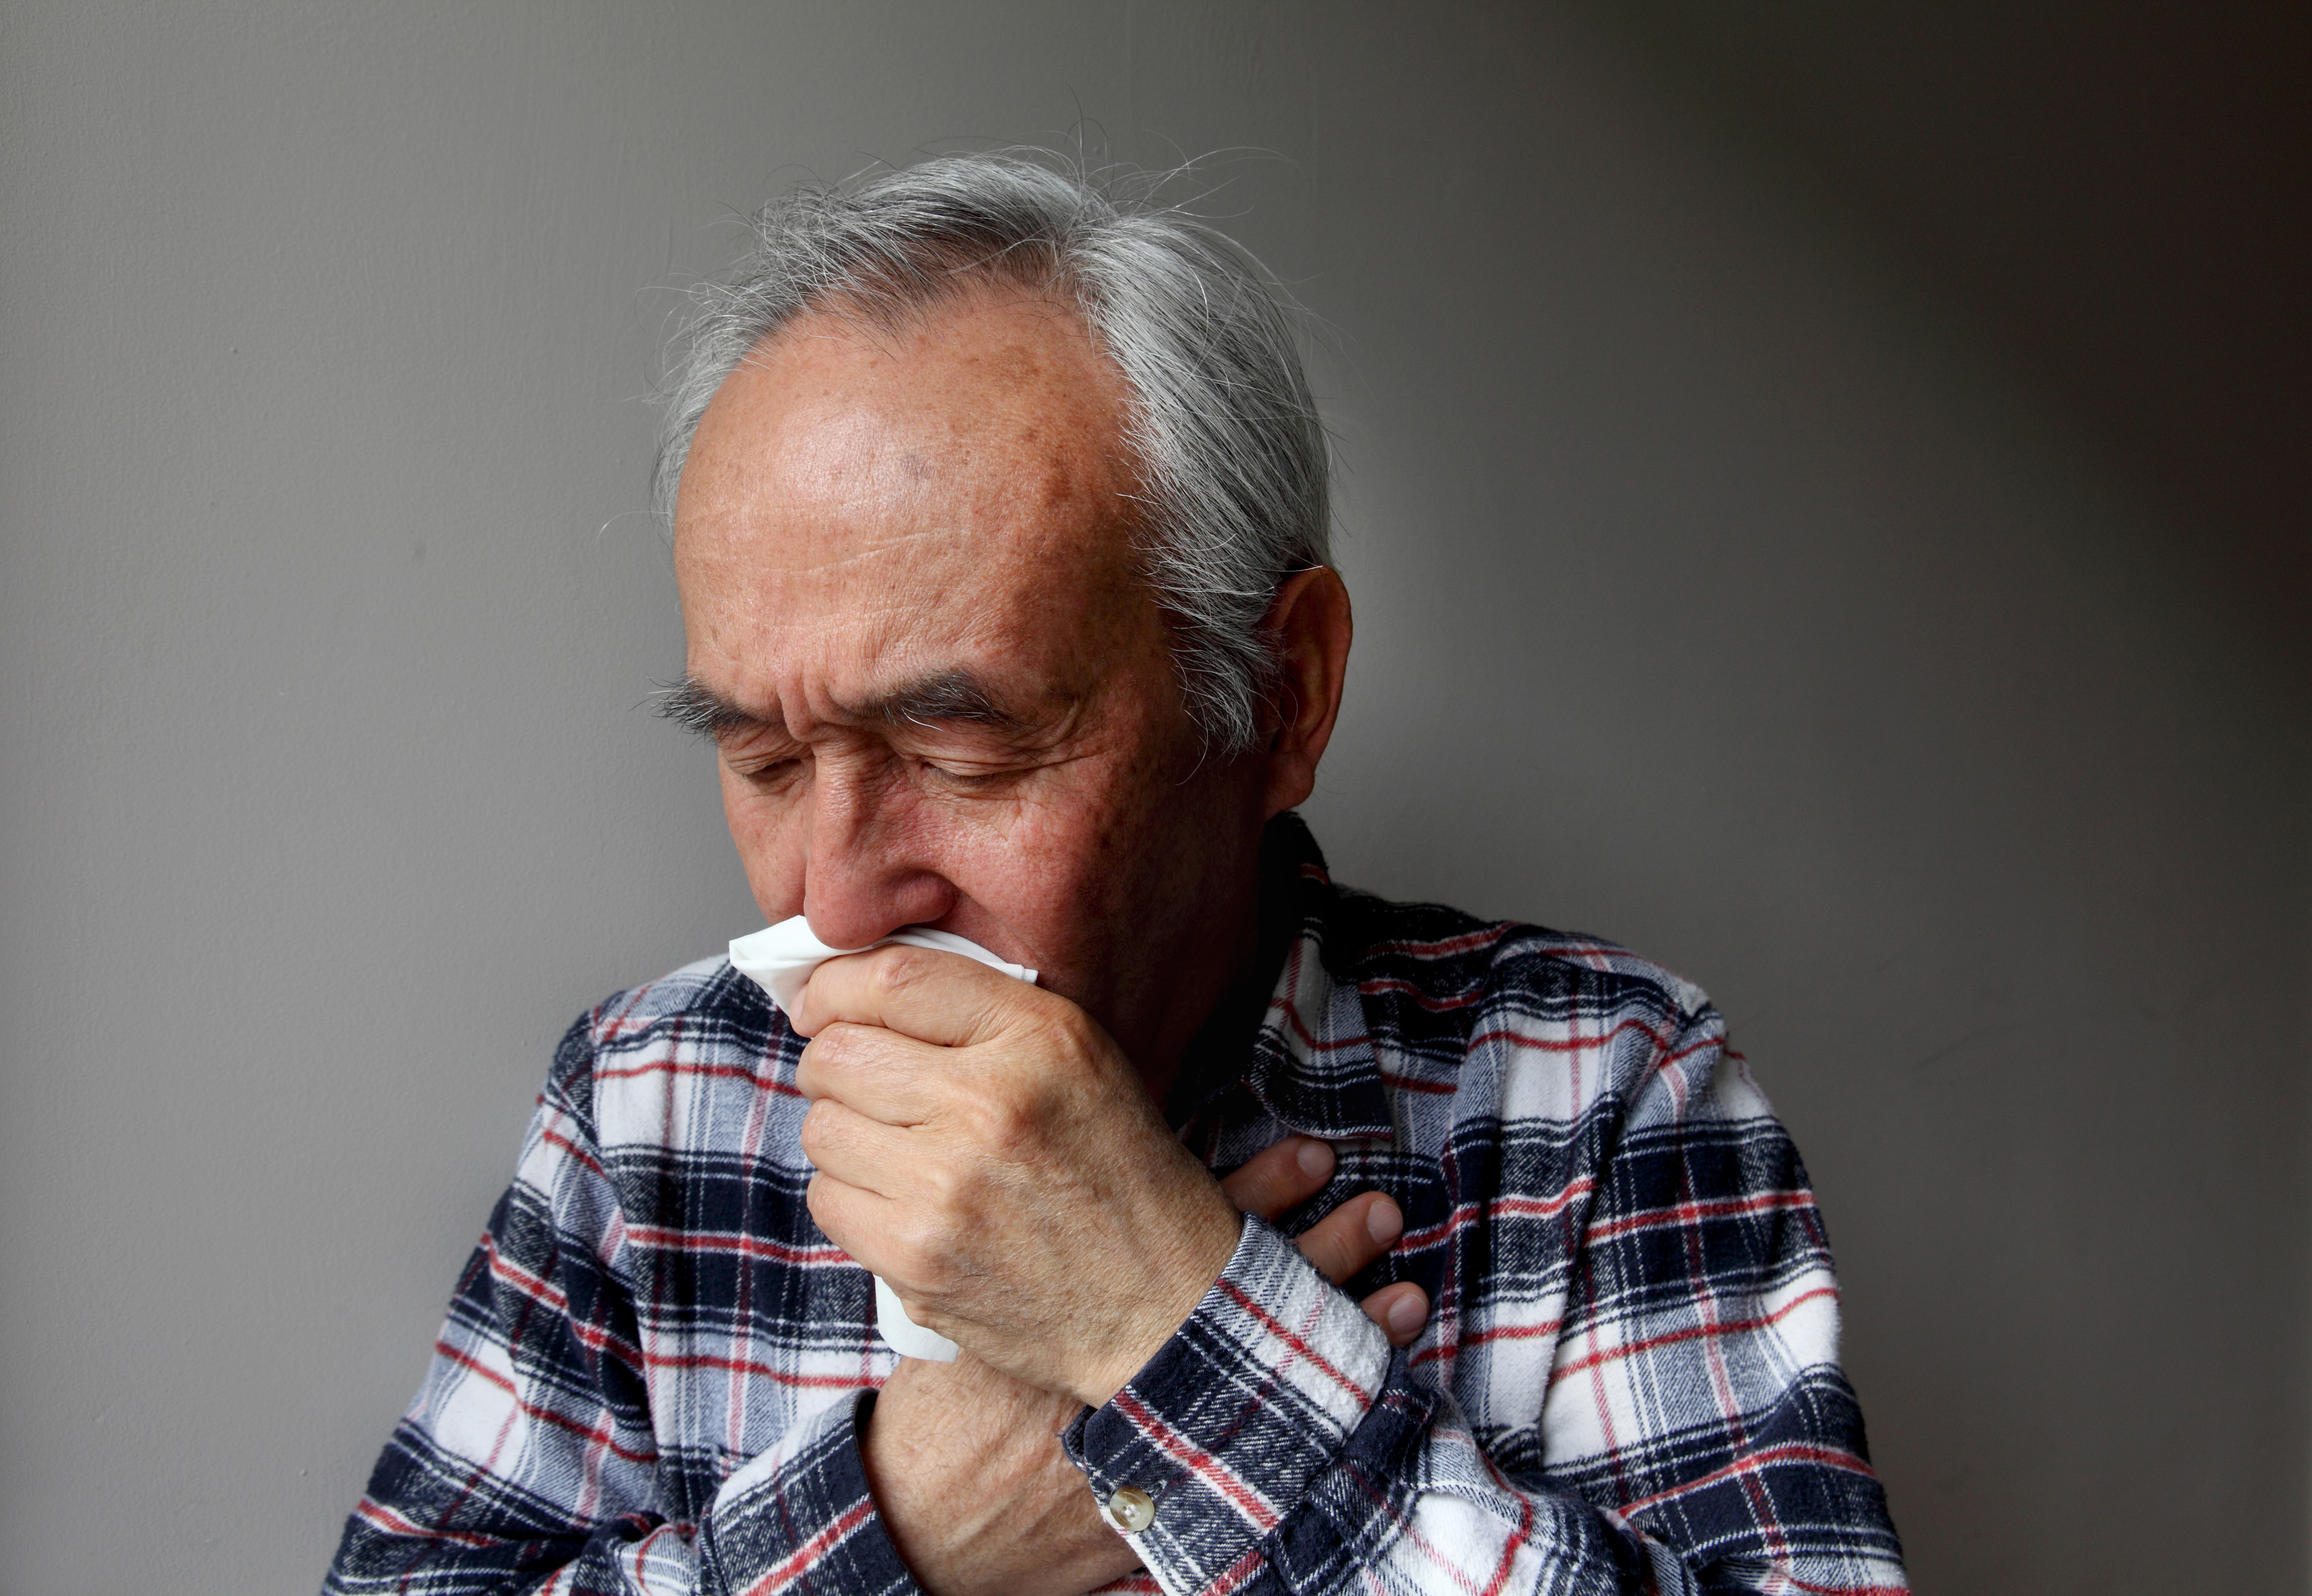 Old man coughing into a napkin | Source: Getty Images